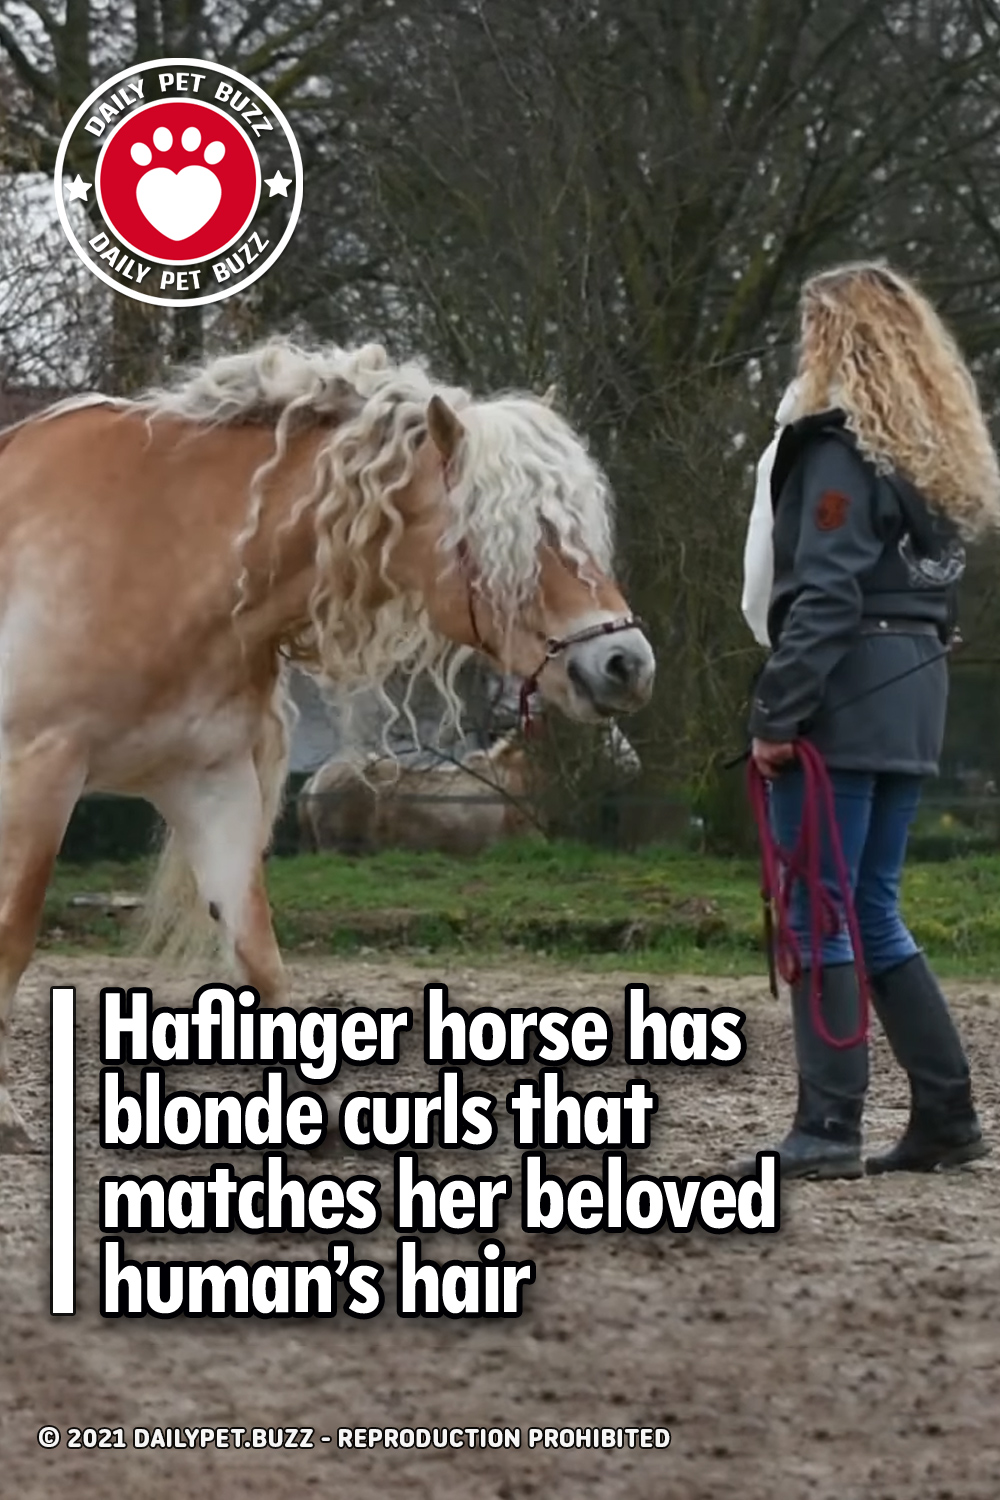 Haflinger horse has blonde curls that matches her beloved human’s hair